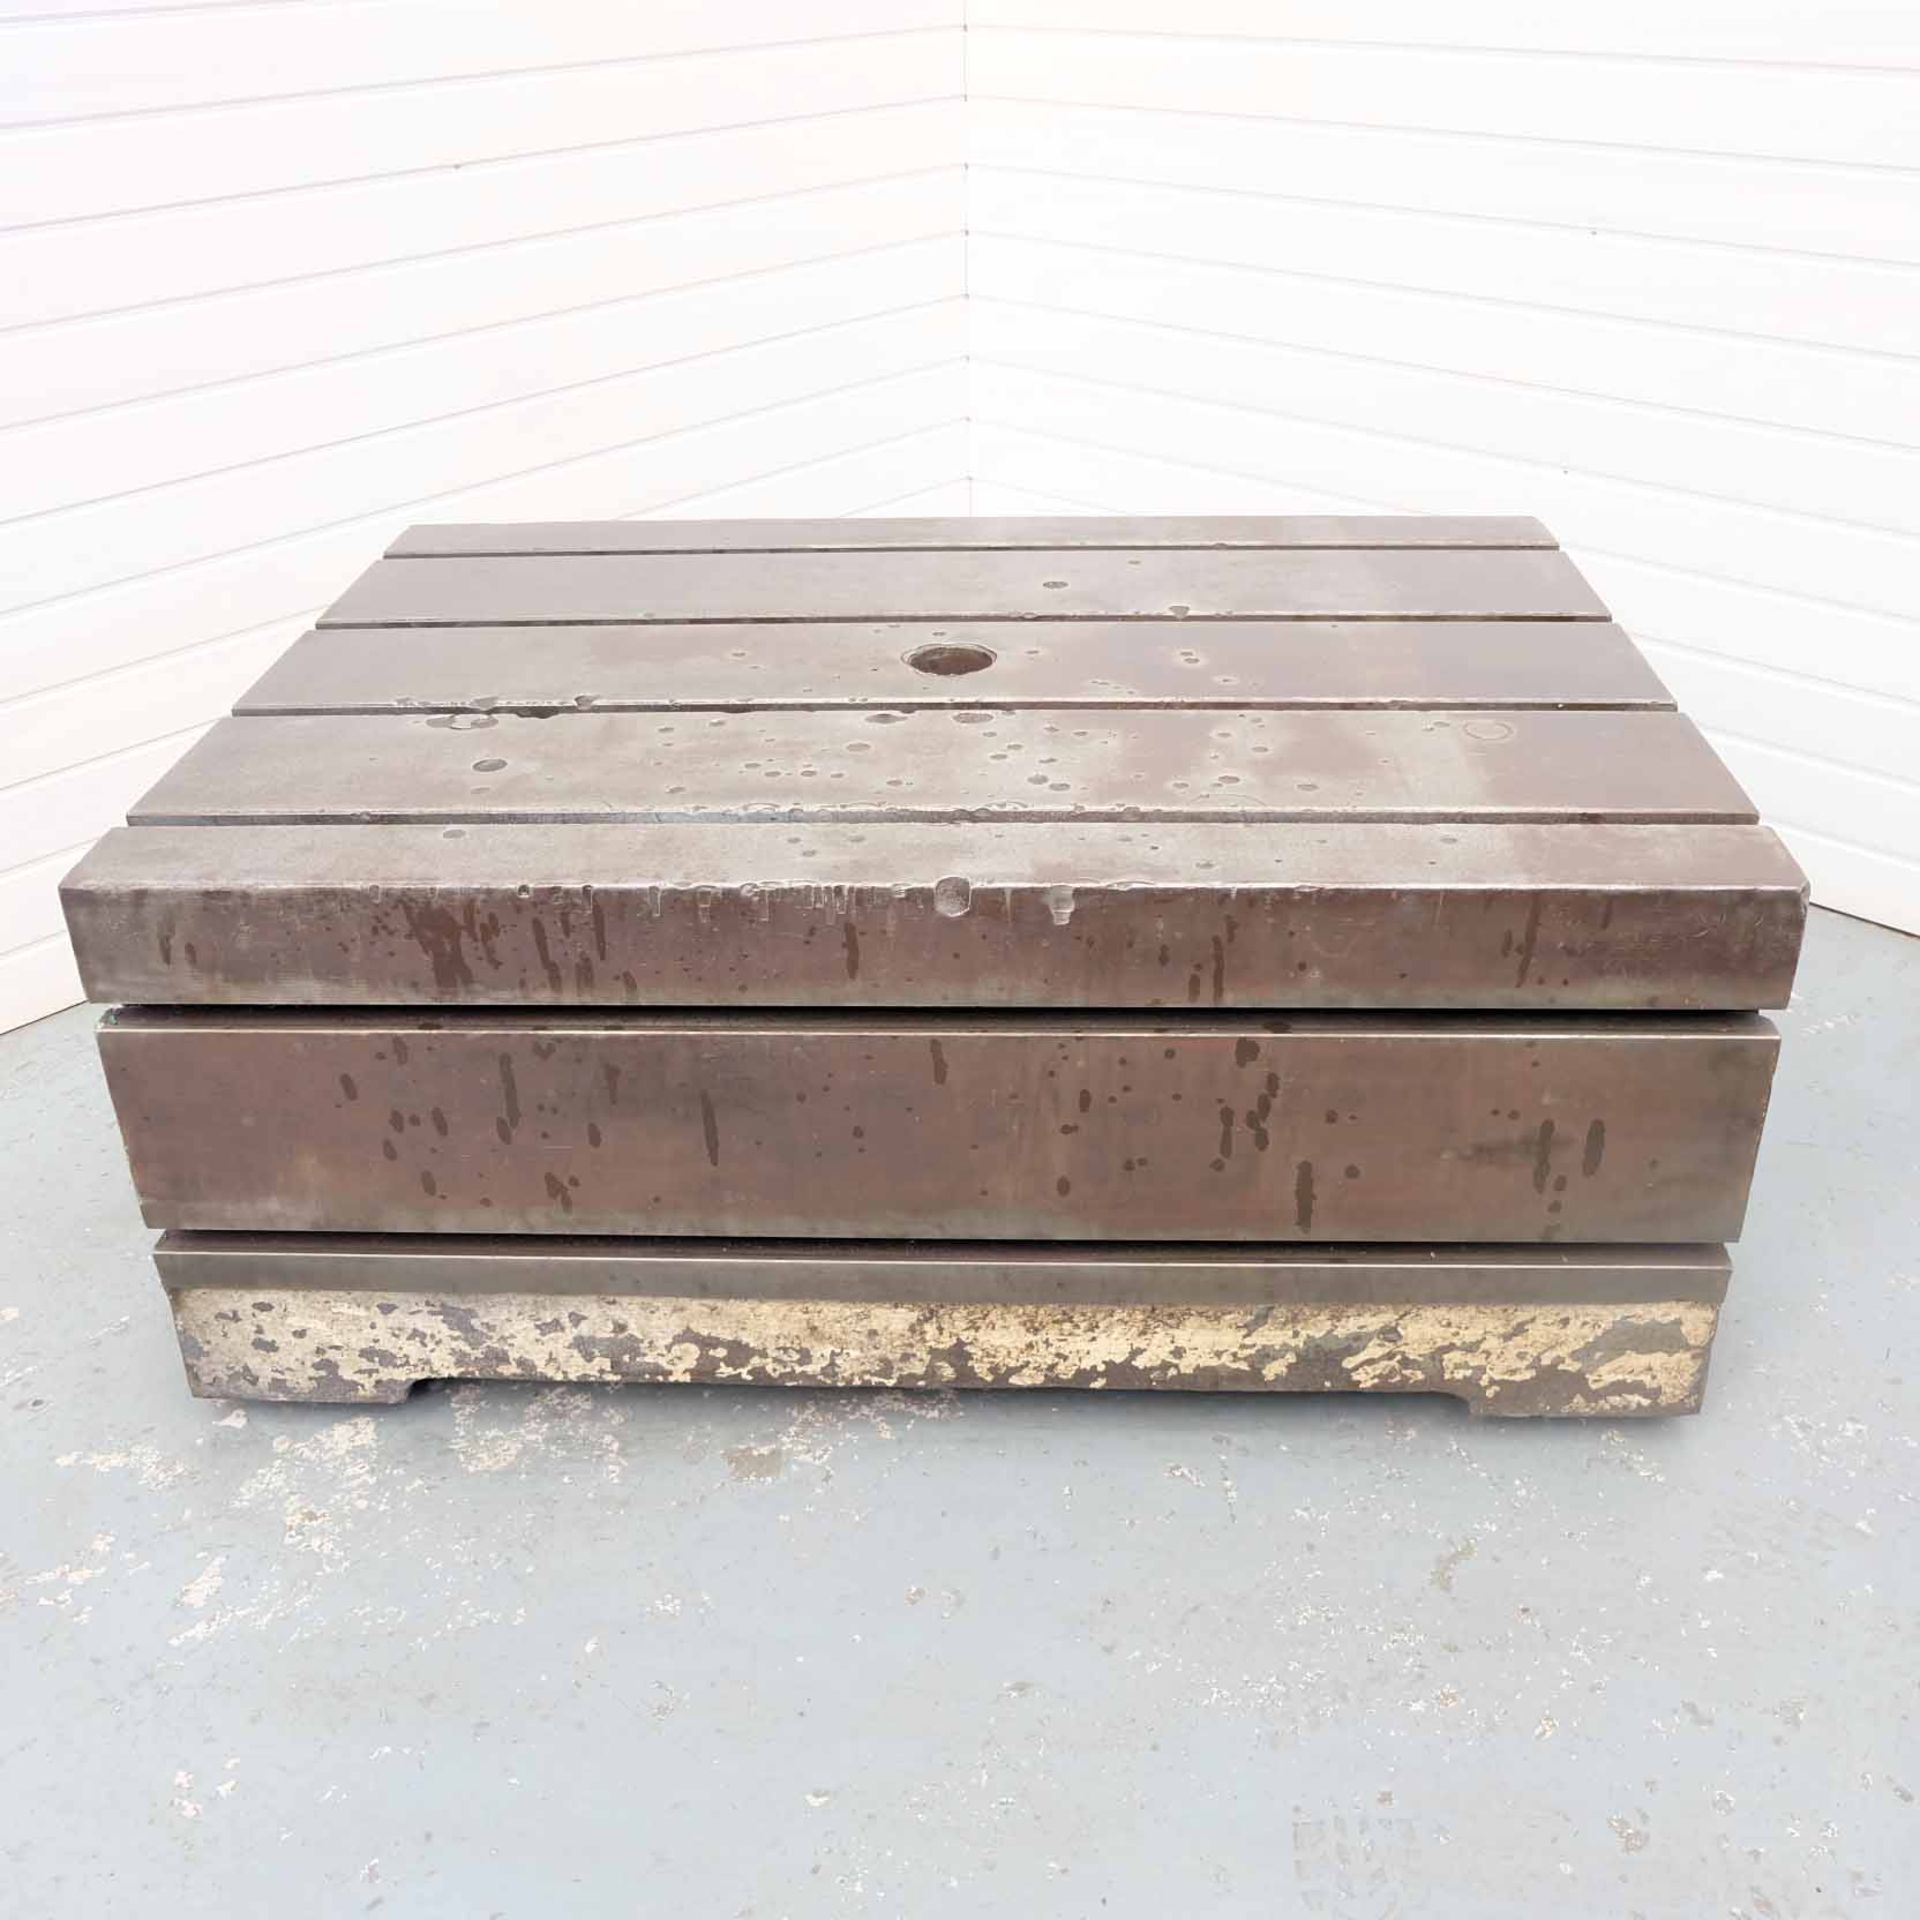 Tee Slotted Box Table. Size 51" x 36" x 20" High. 4 Tee Slots on Top. 2 Tee Slots on Front.